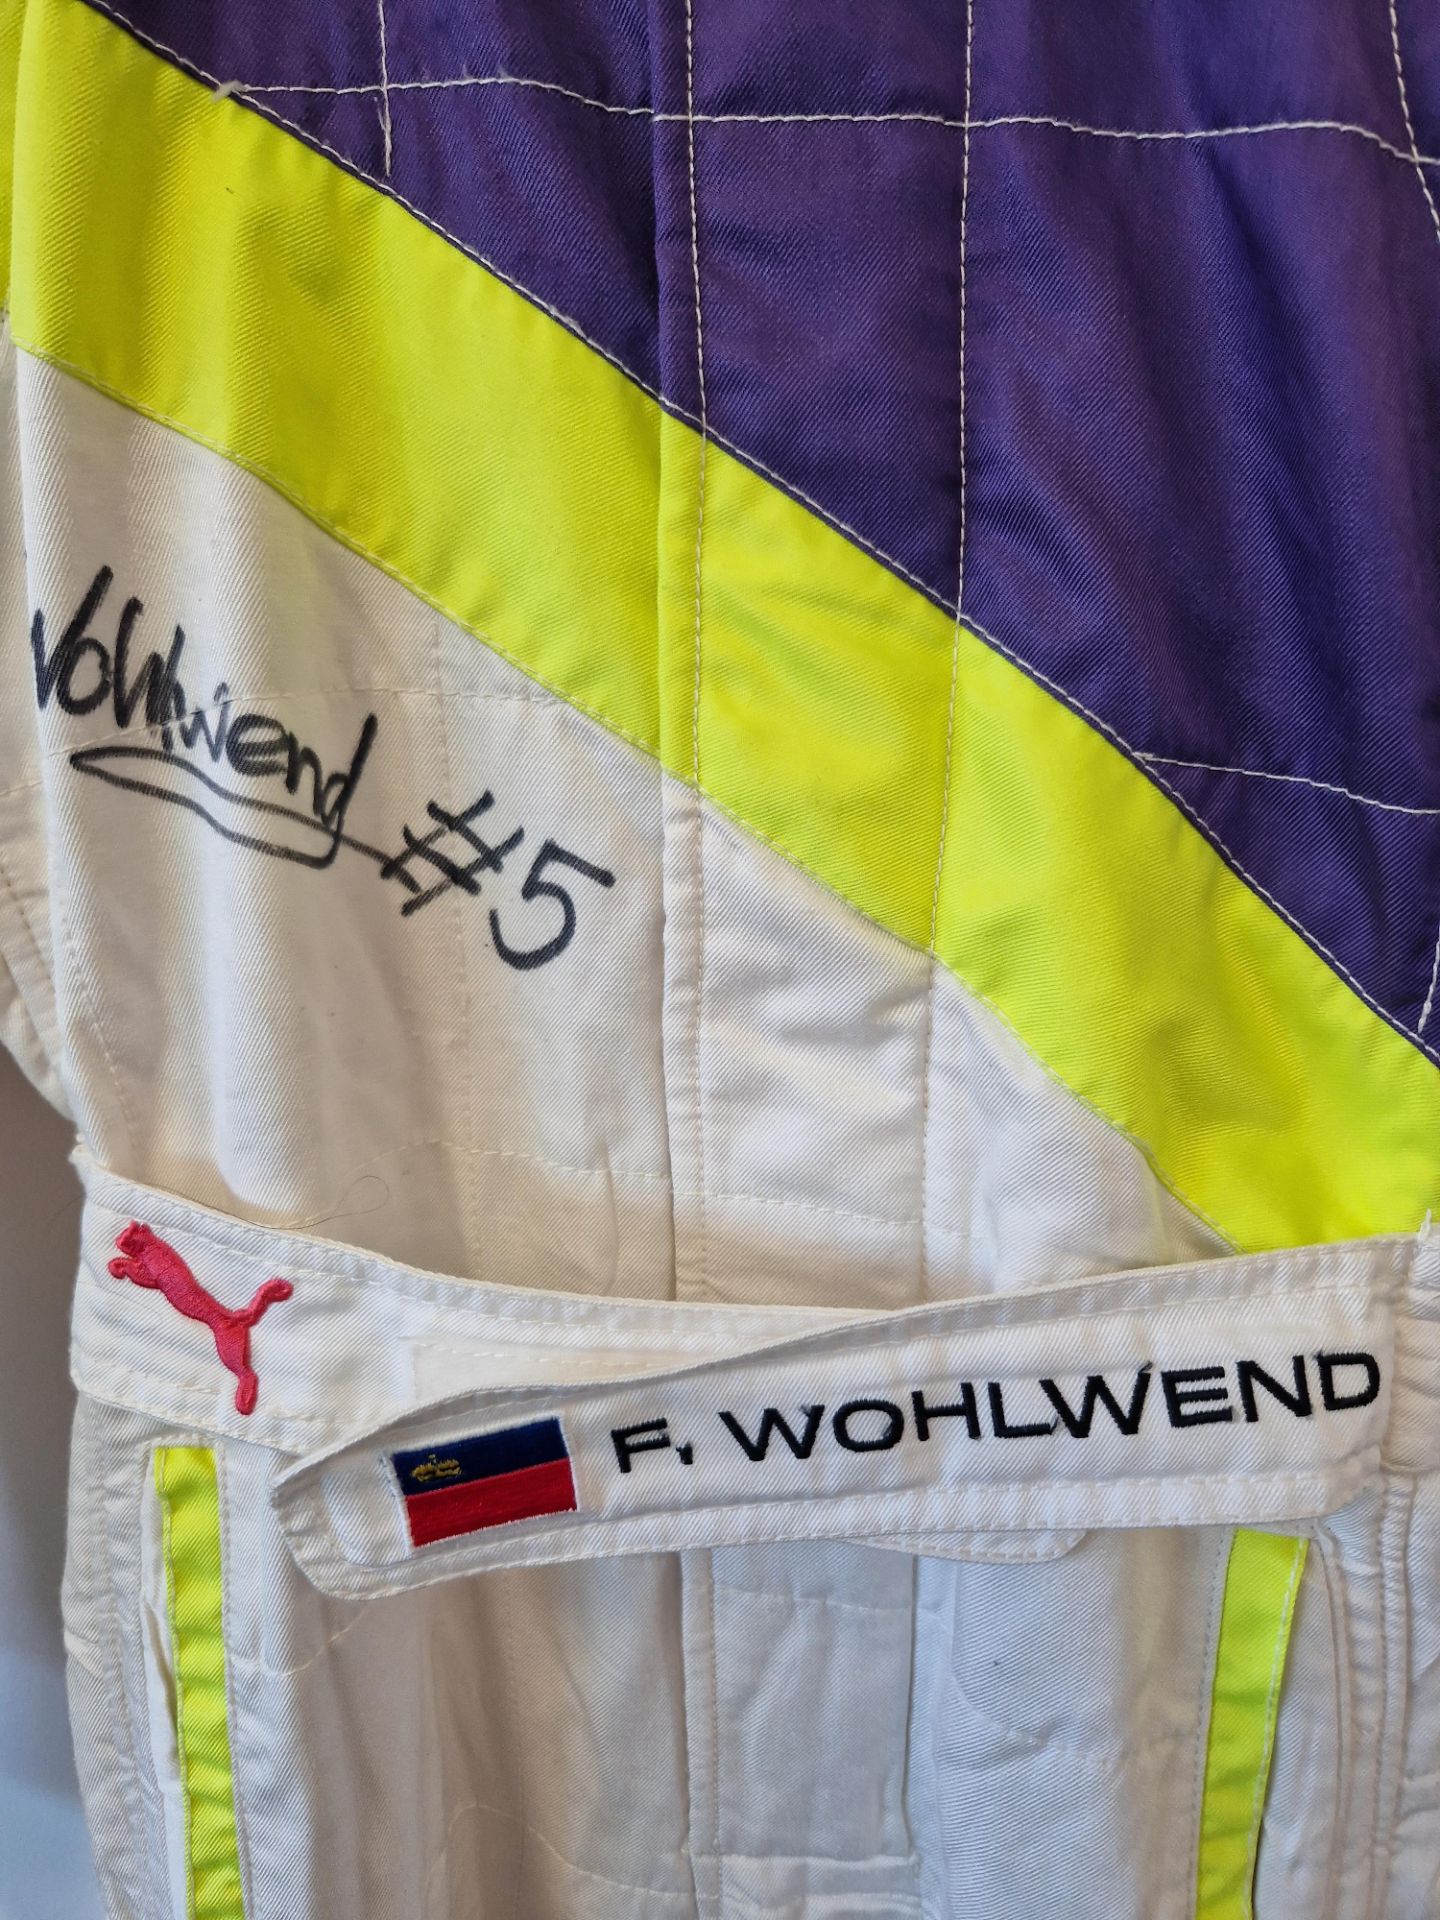 One PUMA FIA approved Race Suit (Size - Made to Measure) worn by Fabienne Wohlwend and signed by her - Image 2 of 2